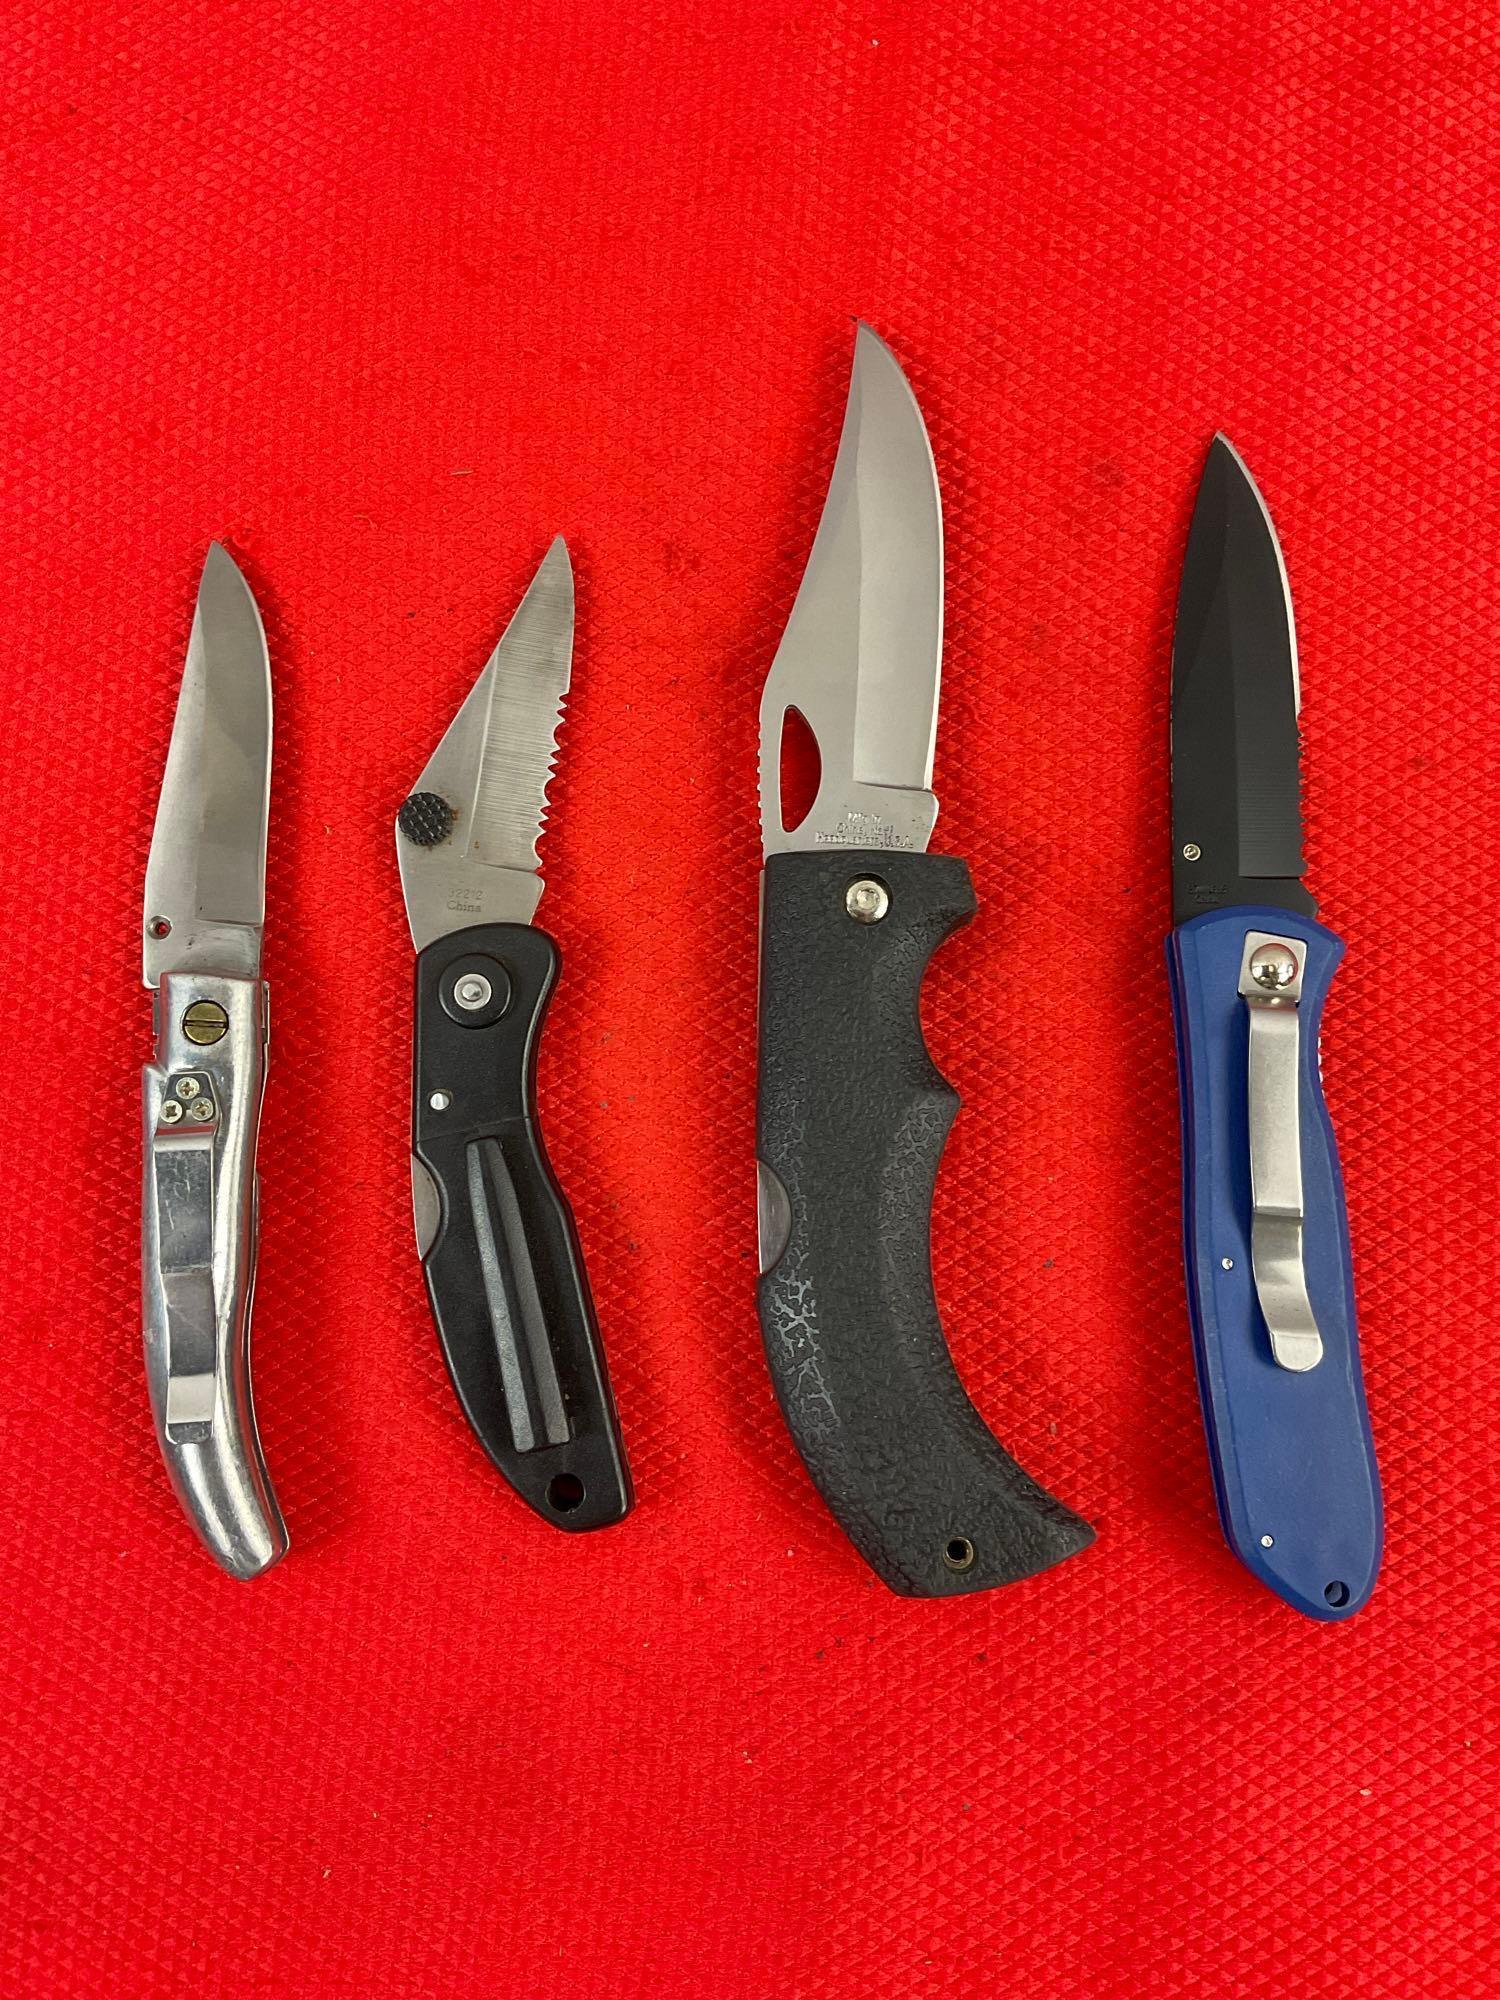 4 pcs Steel Folding Blade Pocket Knives Assortment. 1x MeyerCo, 1x Fury, 1x WY Stainless. See pics.